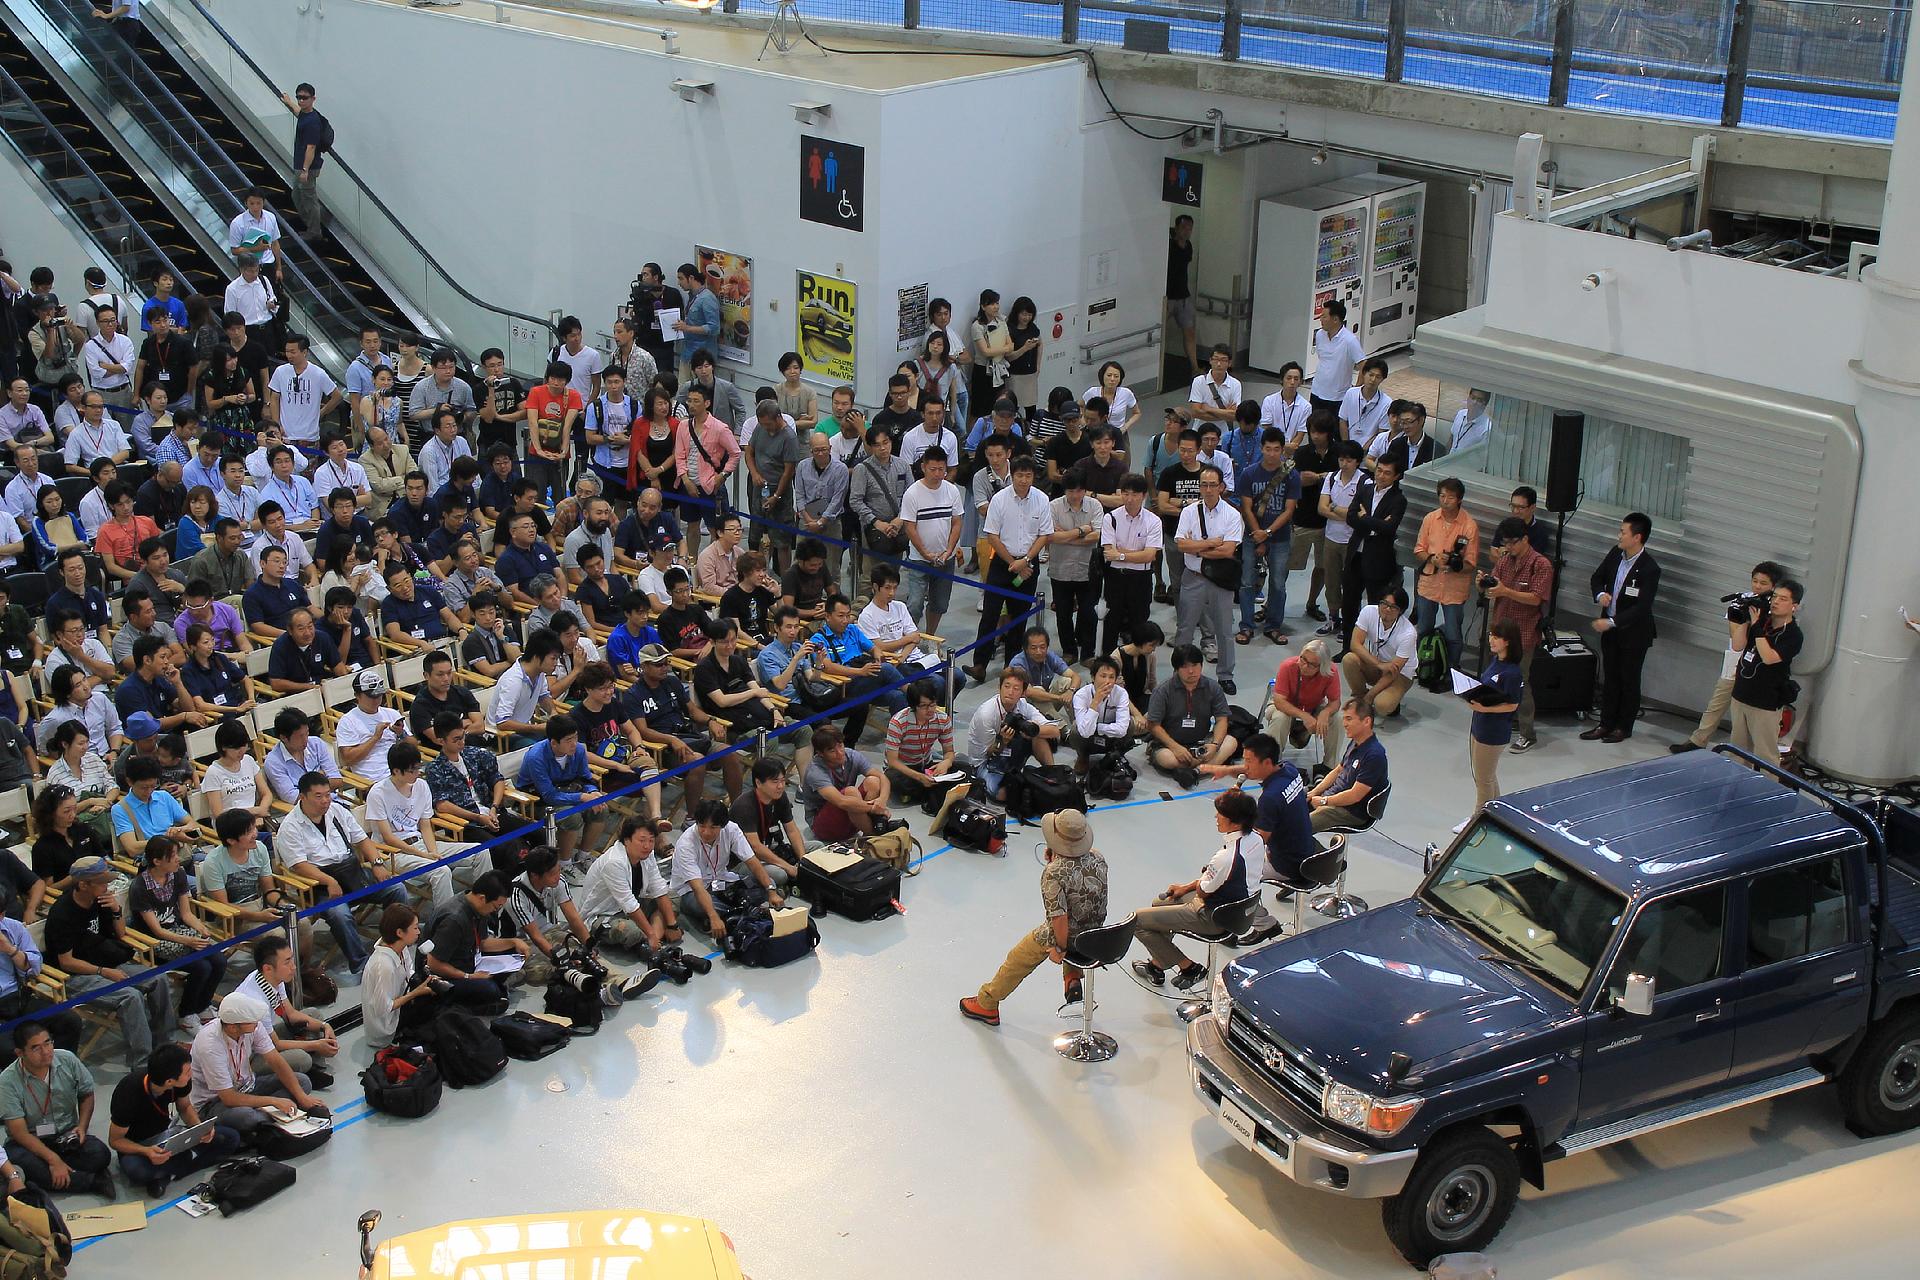 Panel discussion with Land Cruiser enthusiasts